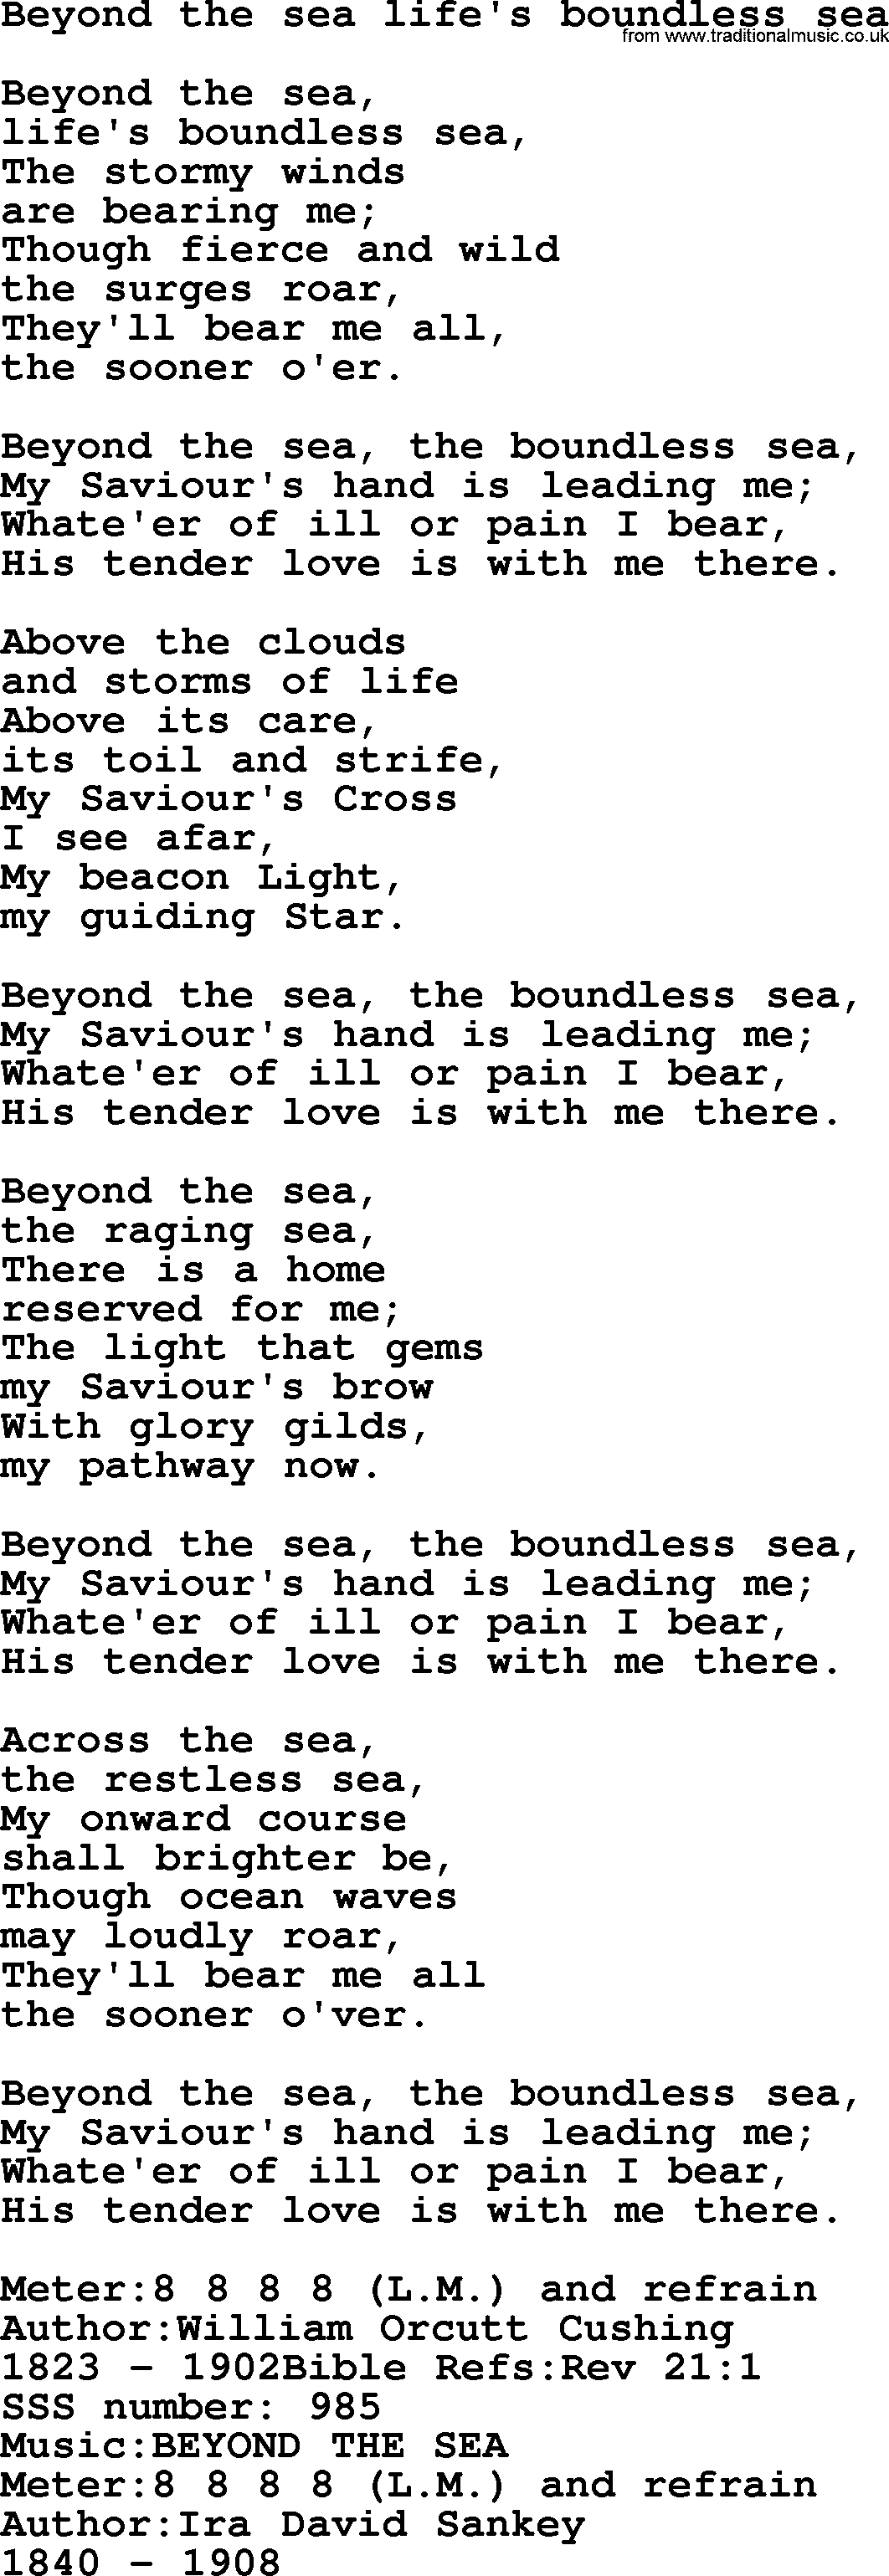 Sacred Songs and Solos complete, 1200 Hymns, title: Beyond The Sea Life's Boundless Sea, lyrics and PDF